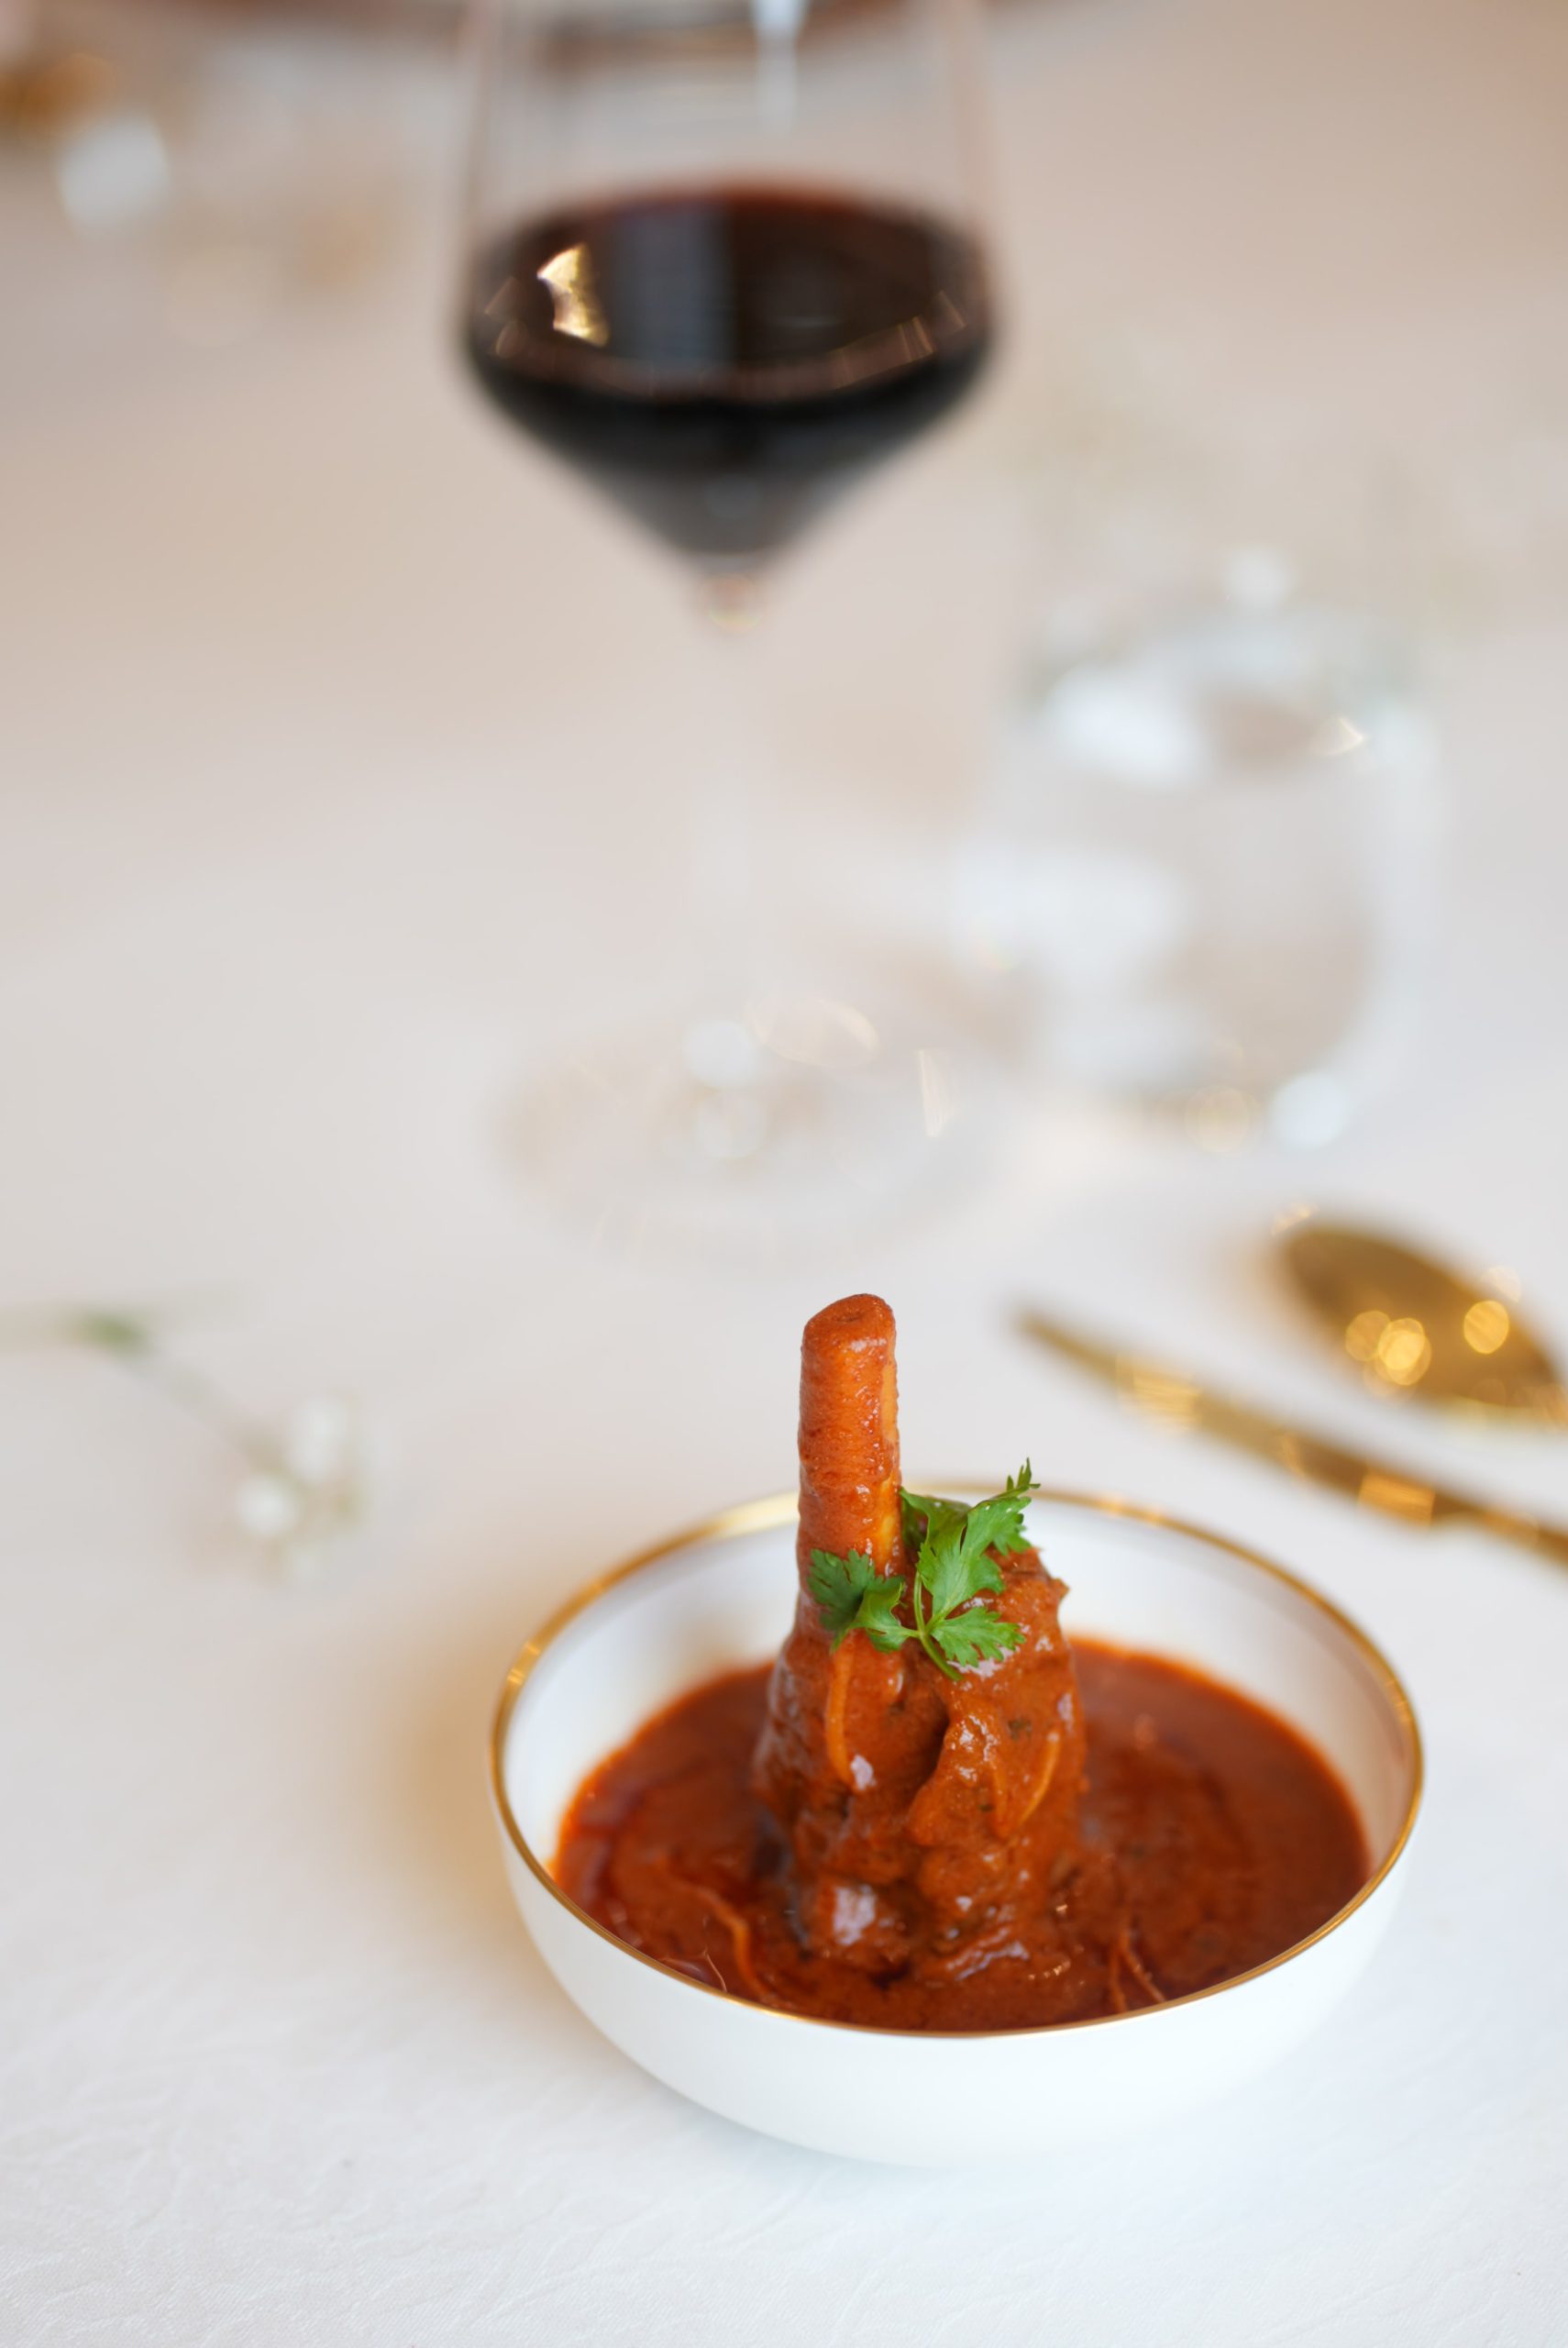 Four Seasons Hotel Bengaluru Brings The Flavours Of Awadh To The City 